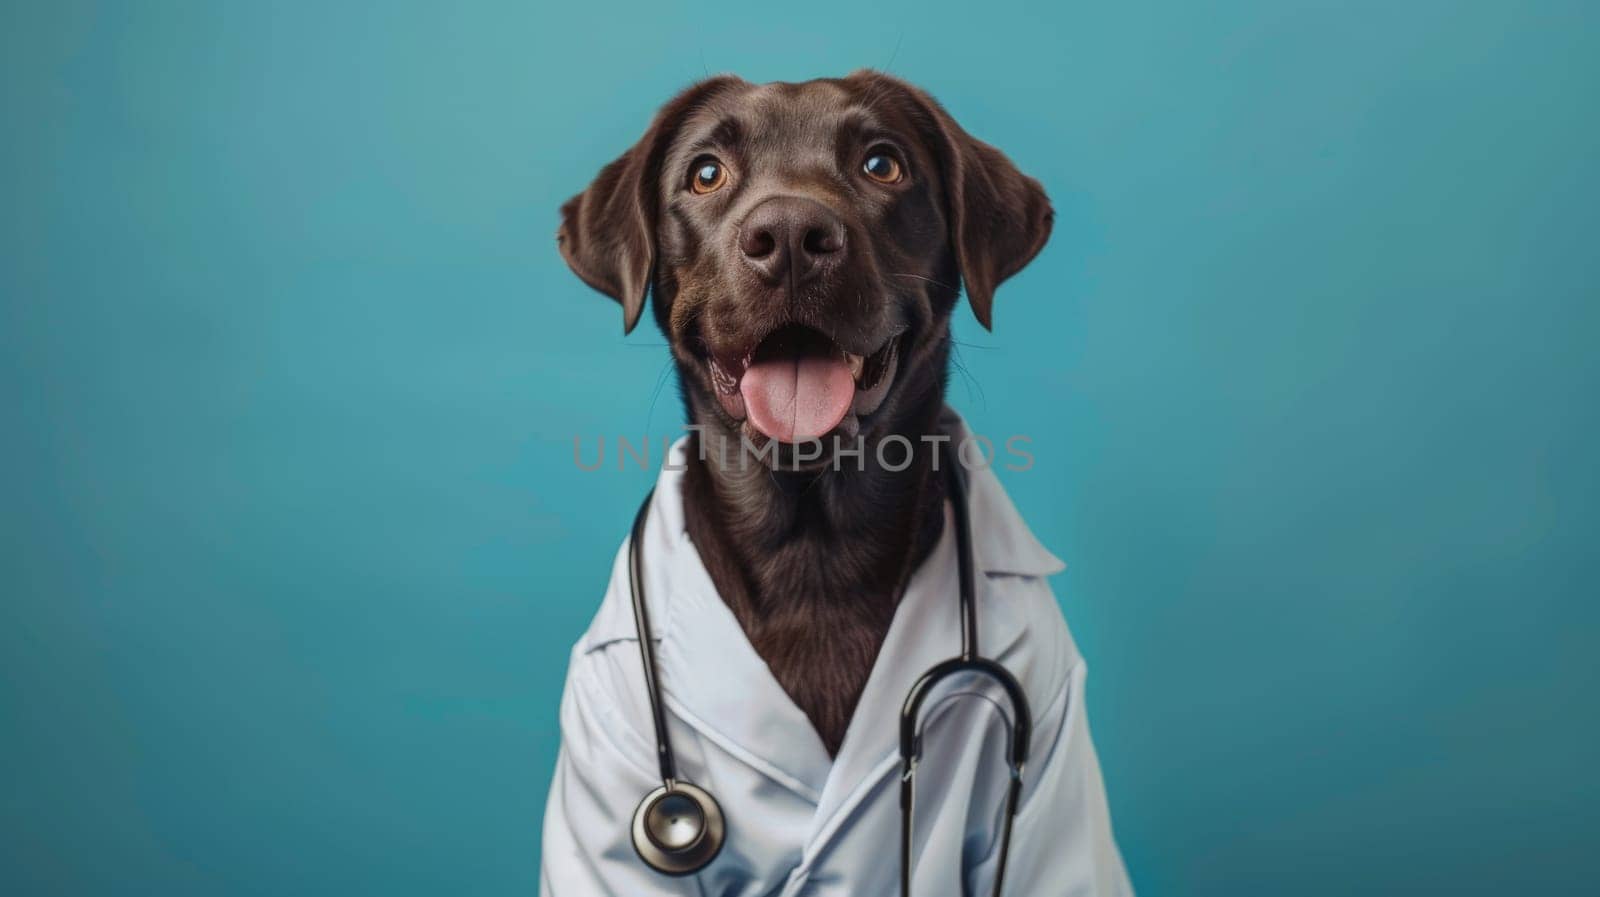 photo of smiling cute dog wearing a lab coat with stethoscope sitting on the blue color background.